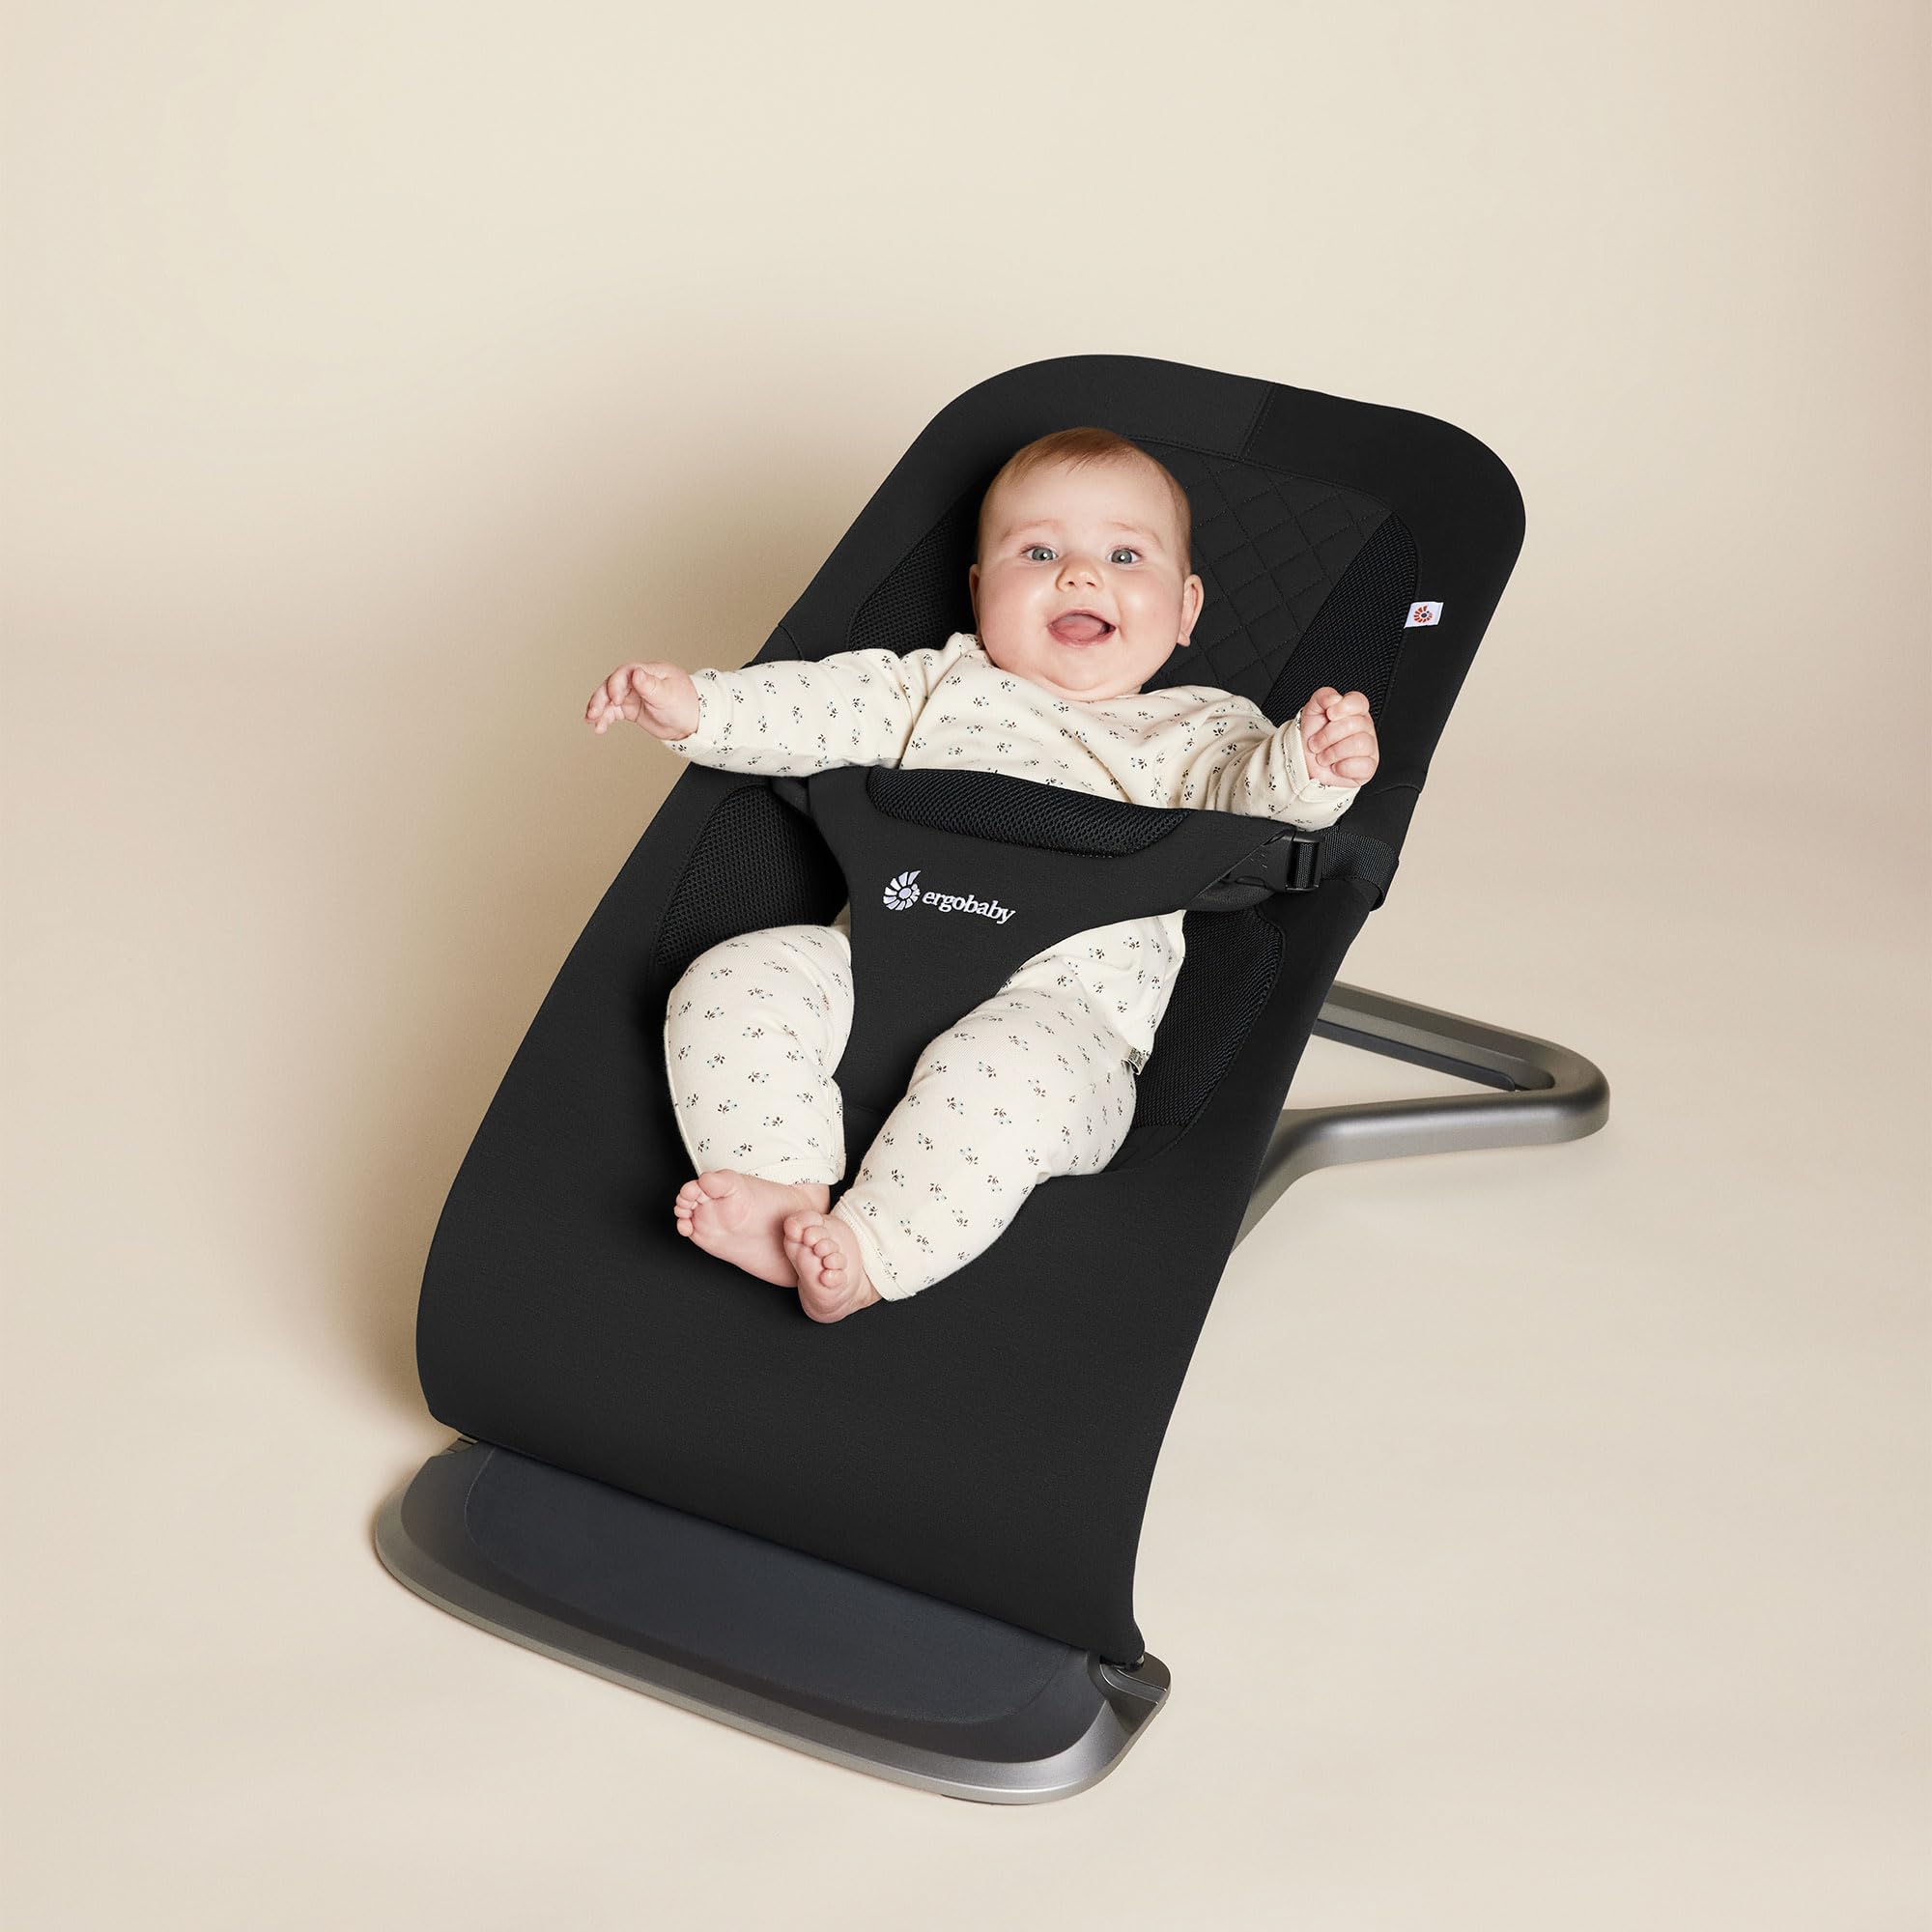 Ergobaby Evolve 3-in-1 Bouncer, Adjustable Multi Position Baby Bouncer Seat, Fits Newborn to Toddler, Onyx Black